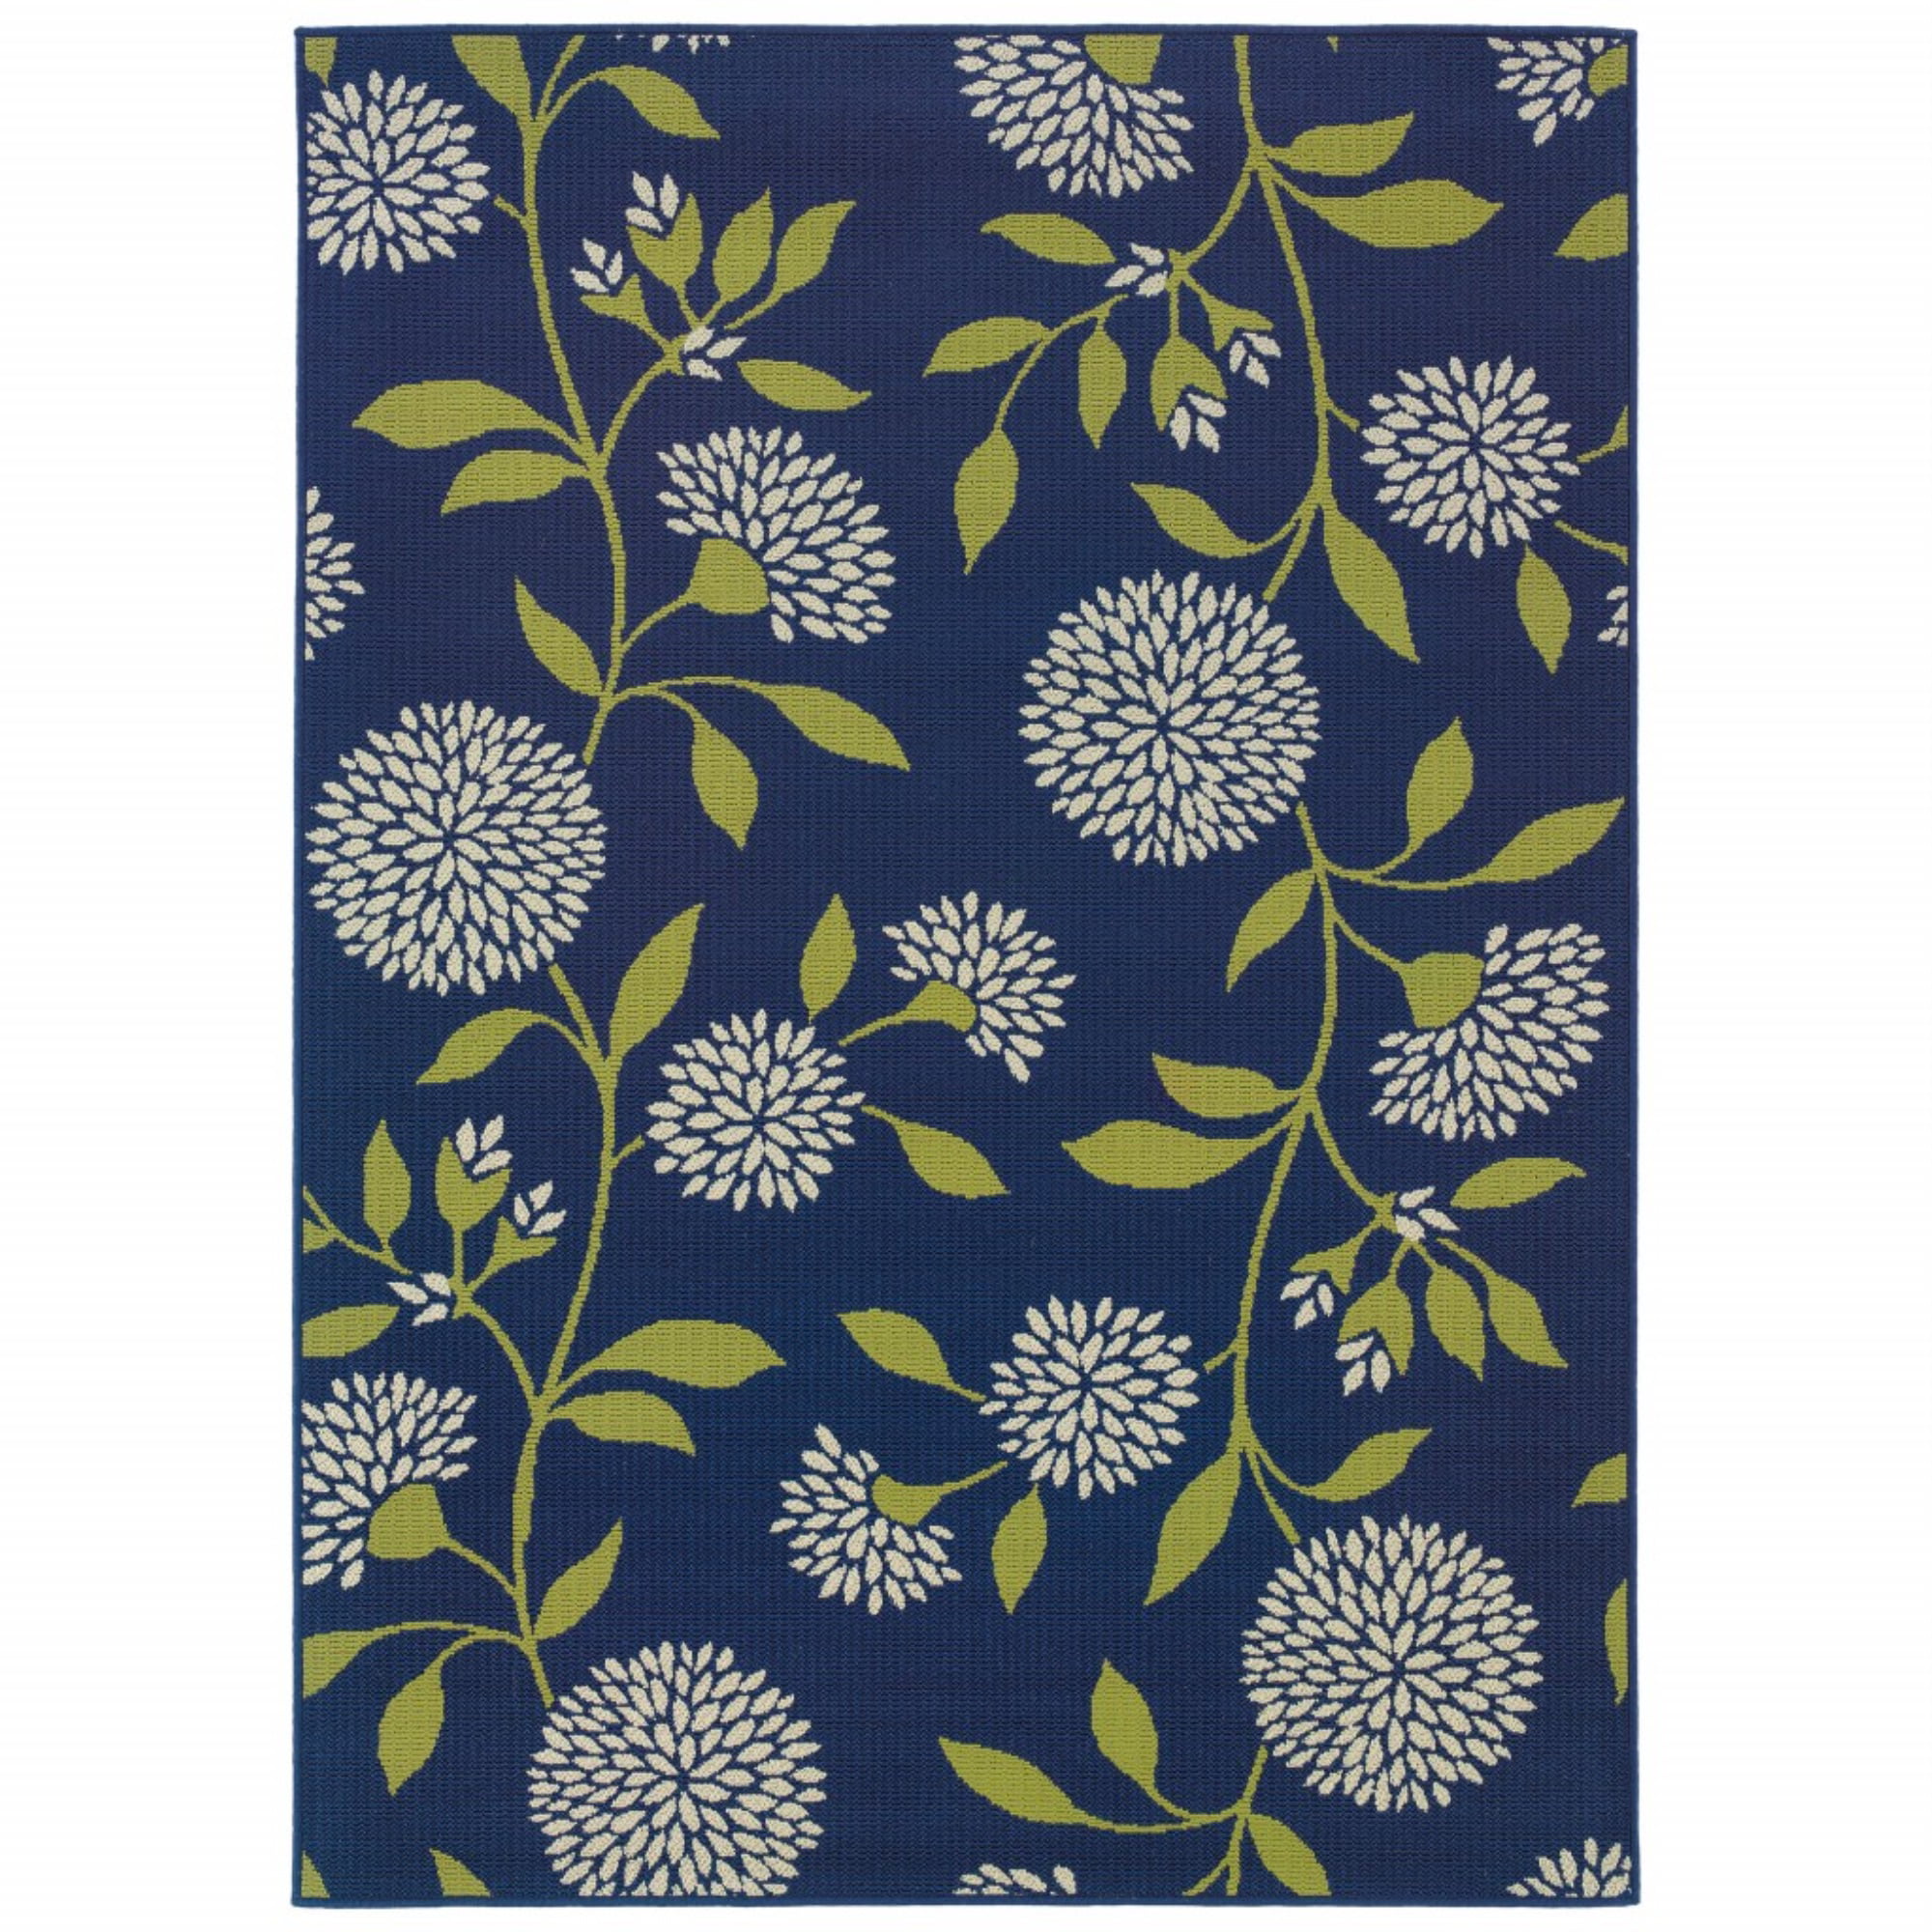 Indigo And Lime Green Fl Indoor, Blue And Lime Green Outdoor Rugs